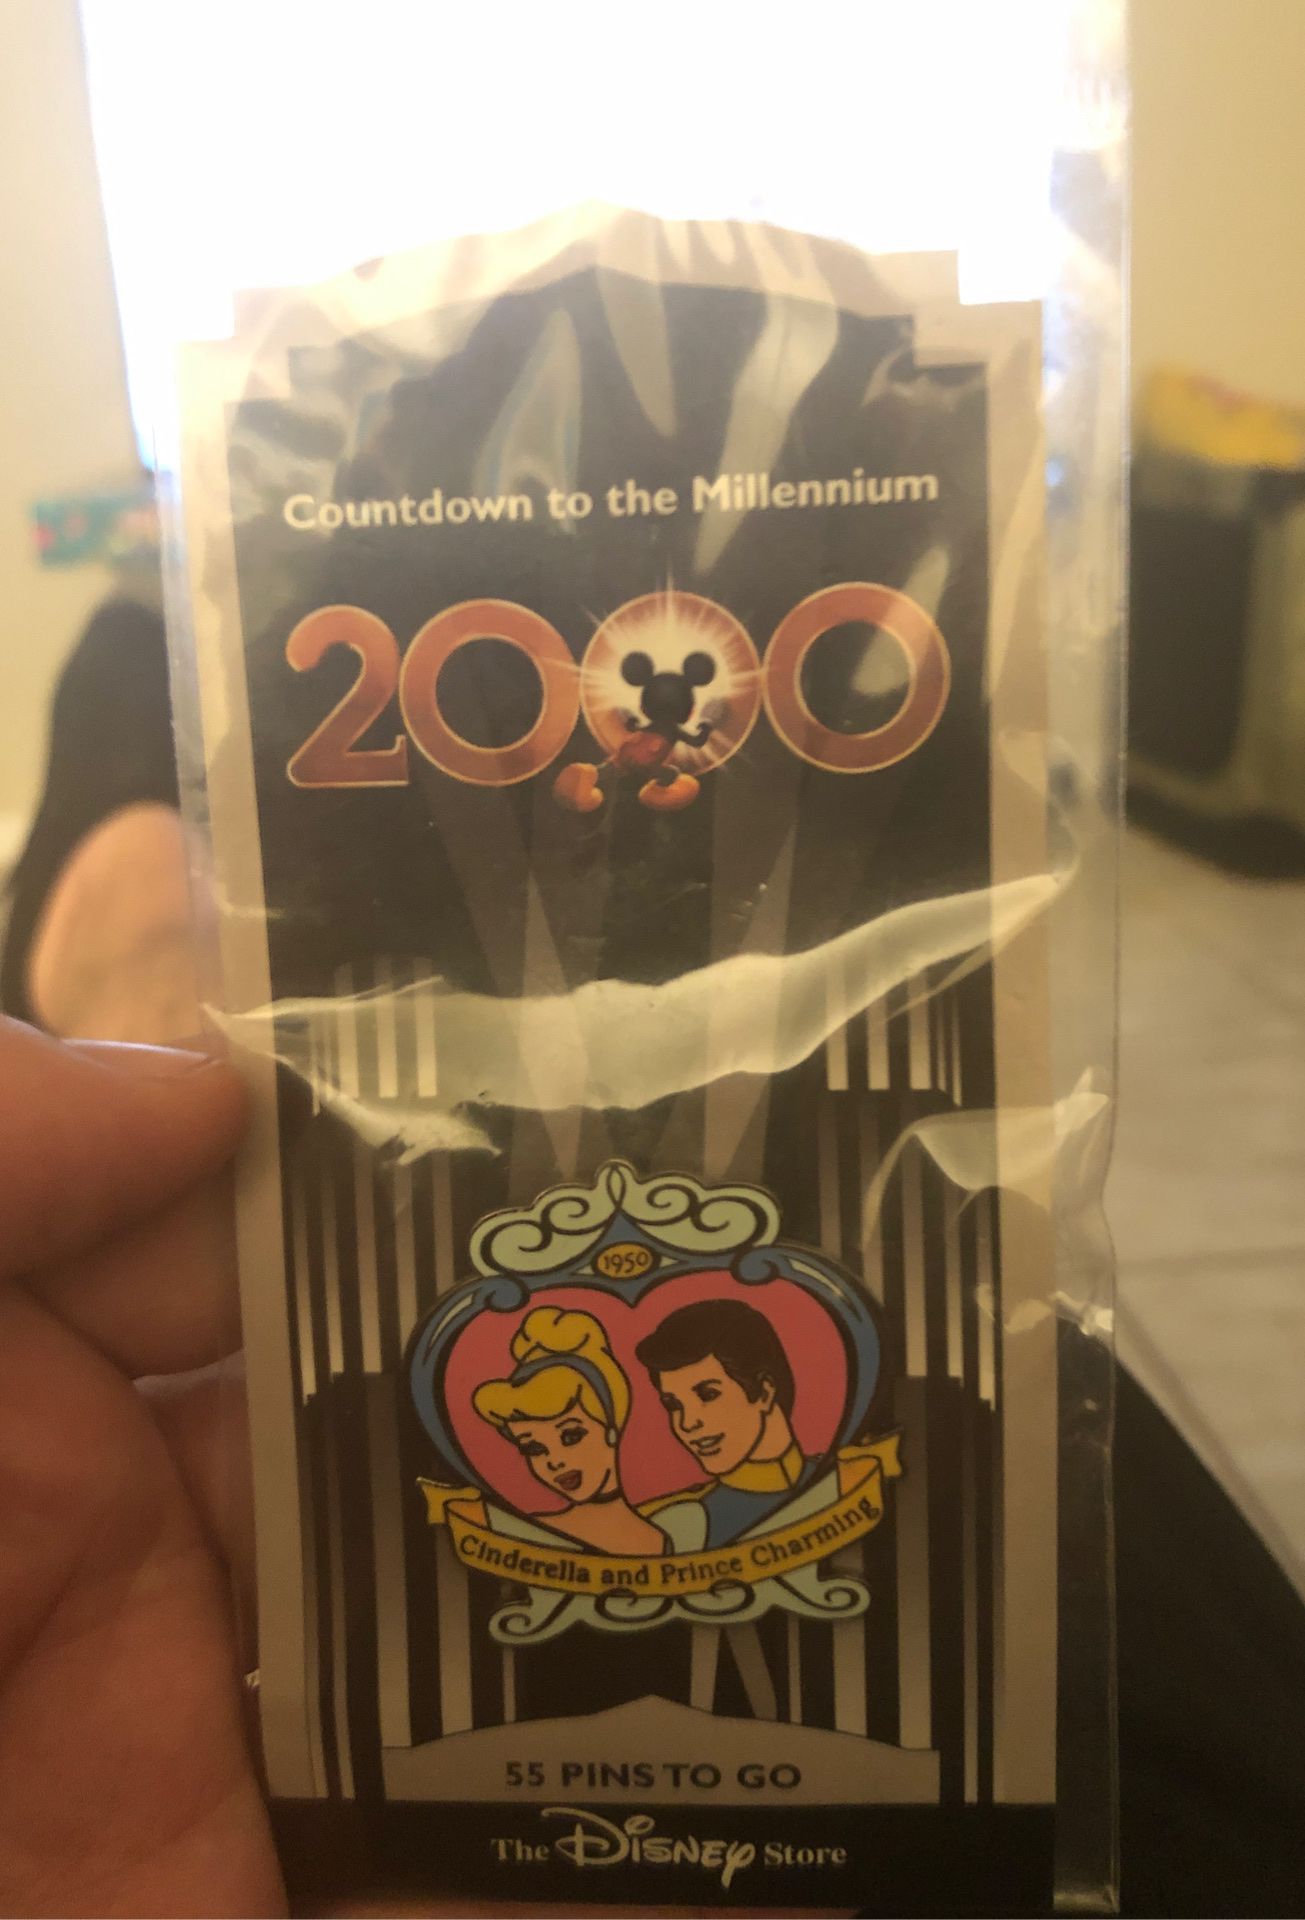 NEVER OPENED ! Disney Store Countdown to 2000 Pin #56 Cinderella & Prince